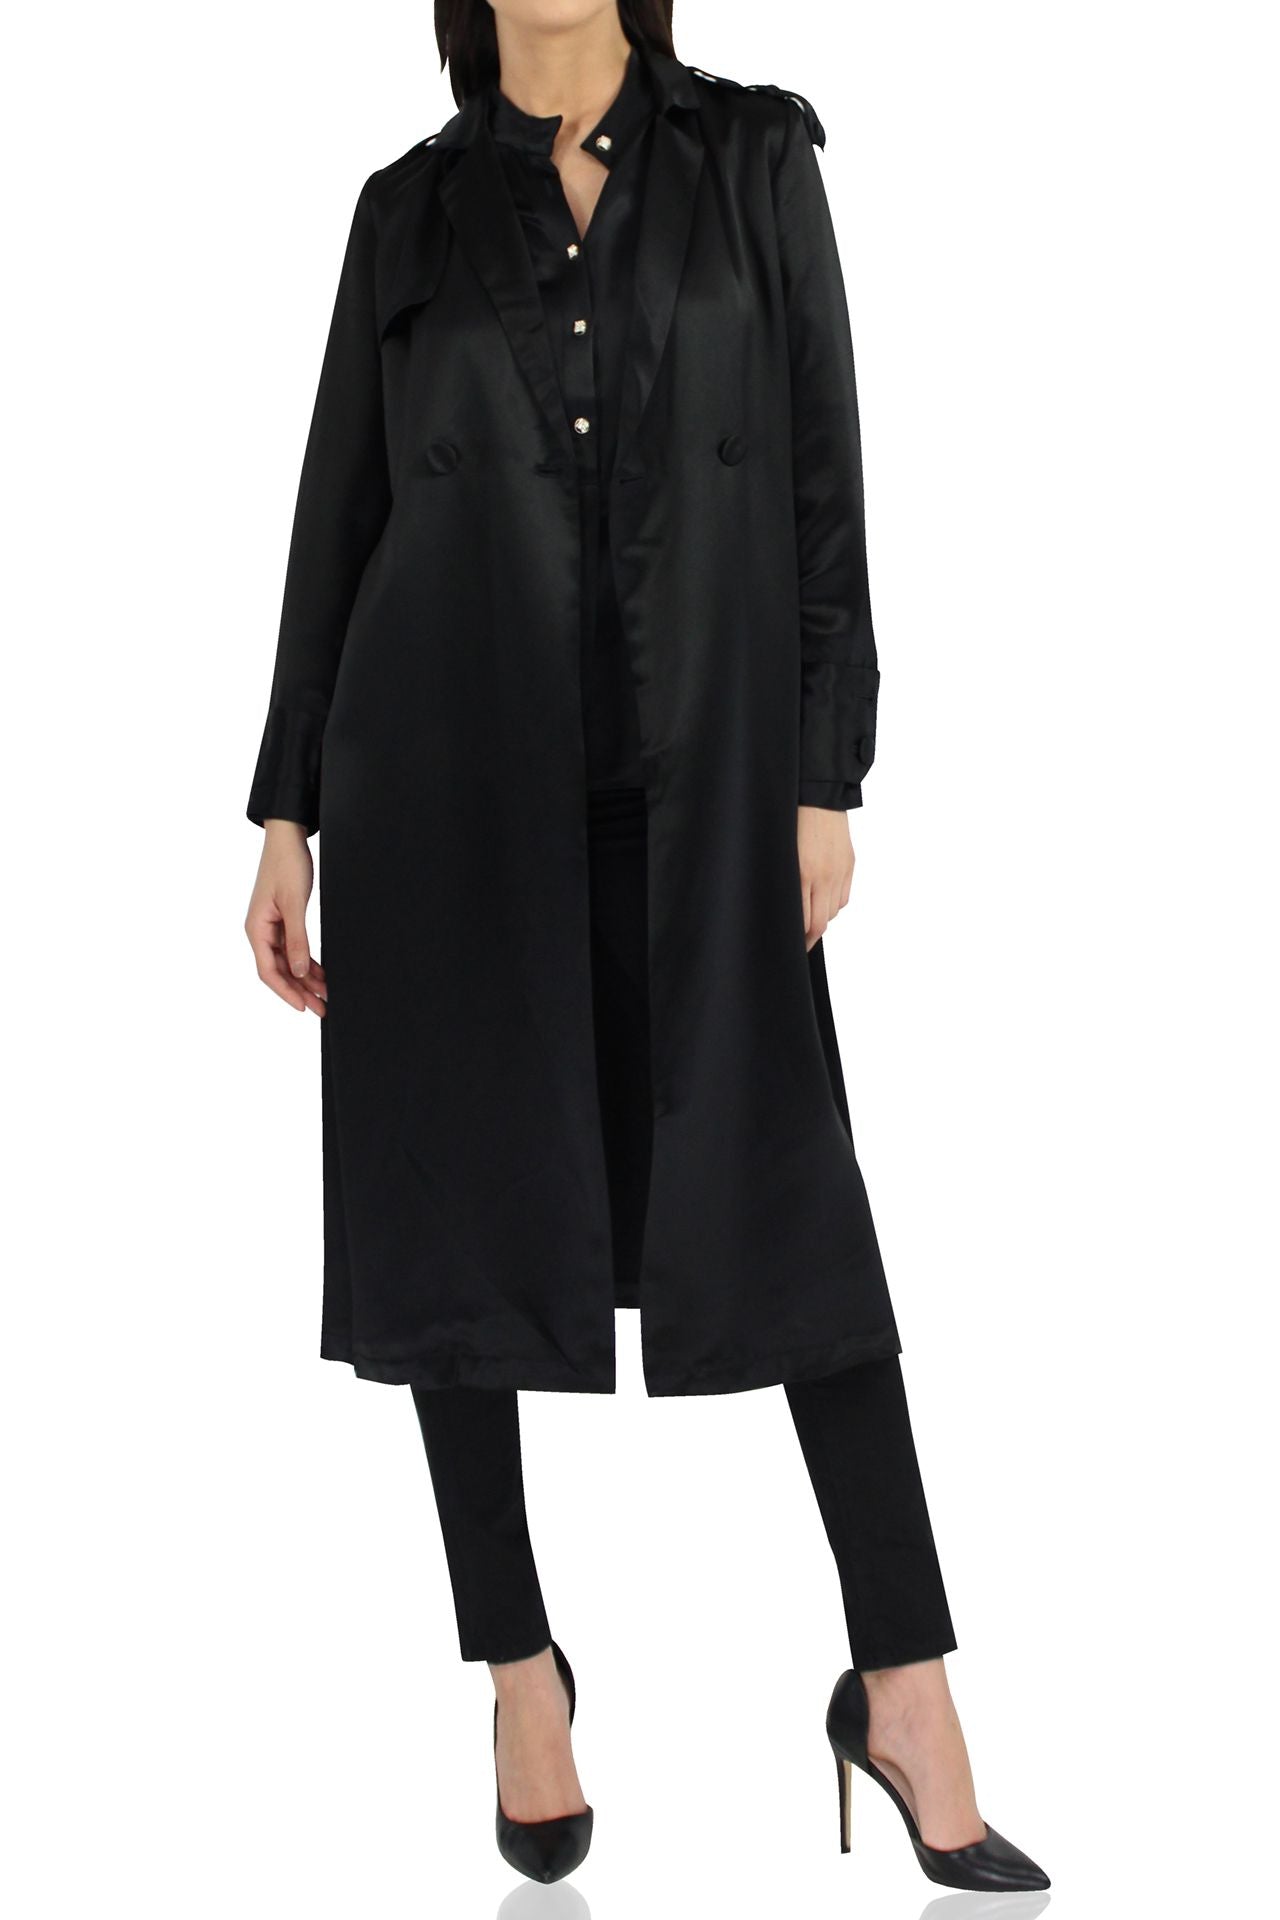 Satin-Trench-Coat-In-Black-By-Kyle-Richard.